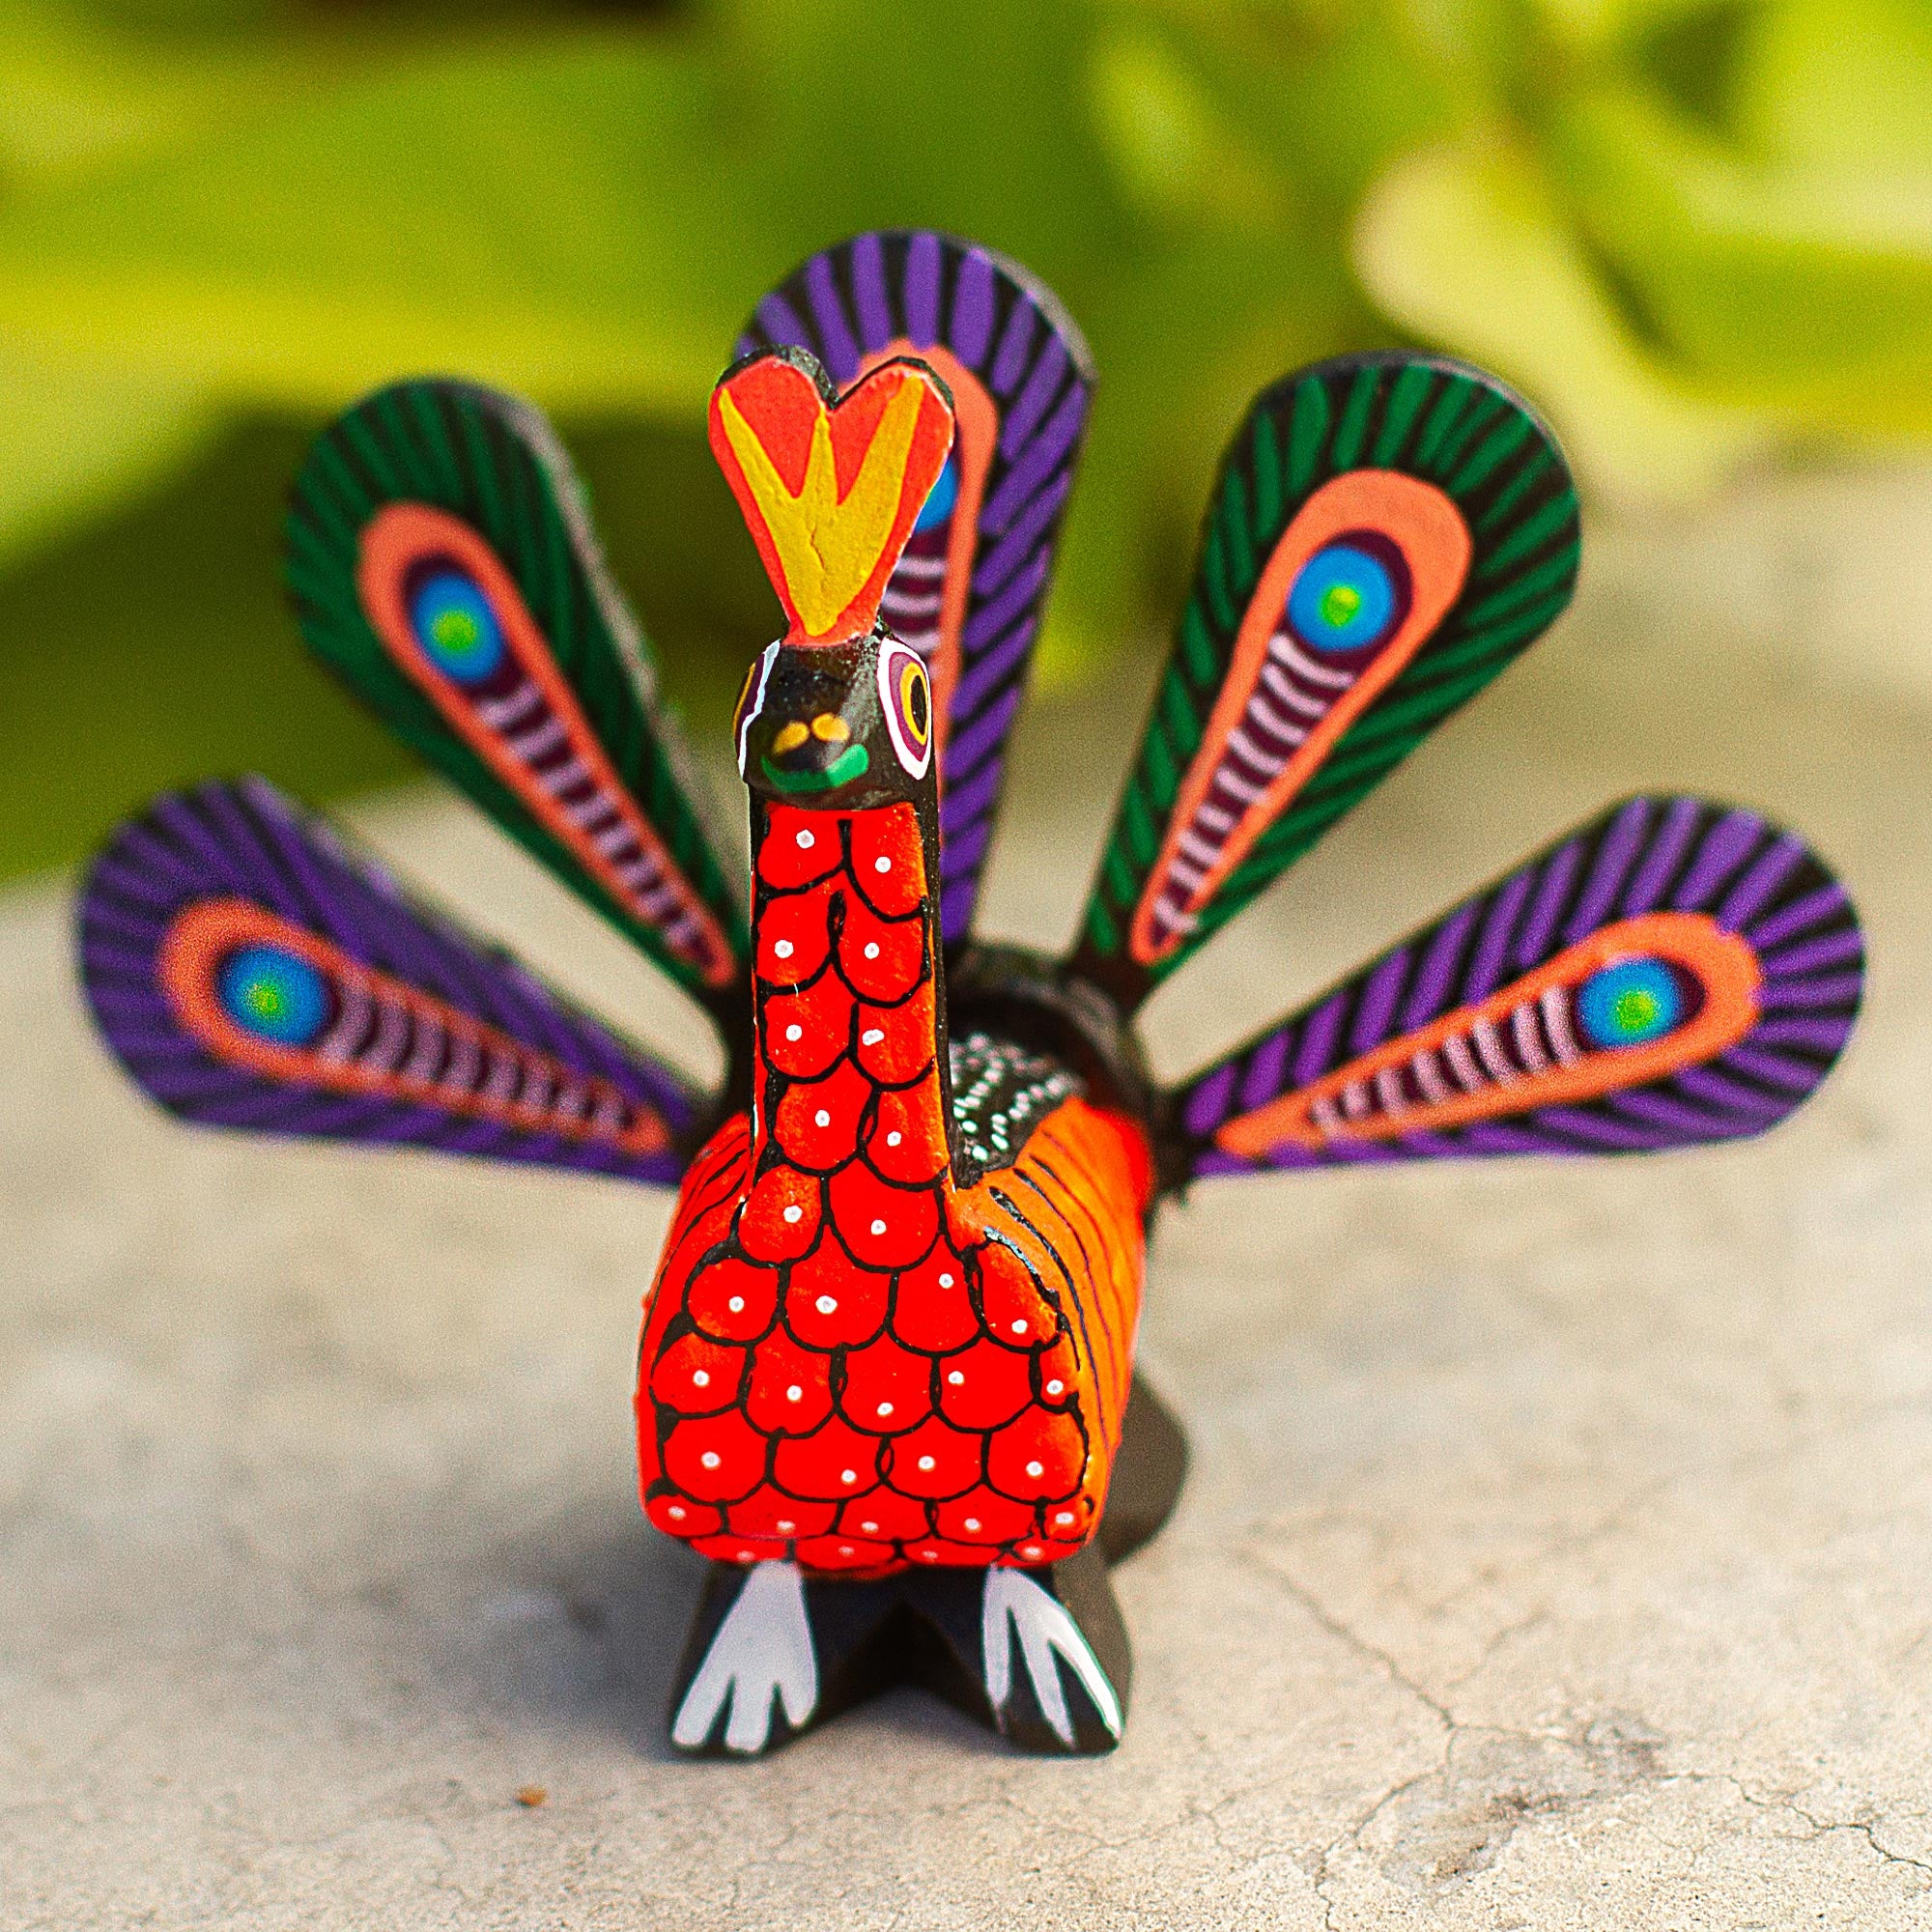 NOVICA Colorful Peacock Hand-Painted Alebrije Wood Peacock Sculpture From Mexico